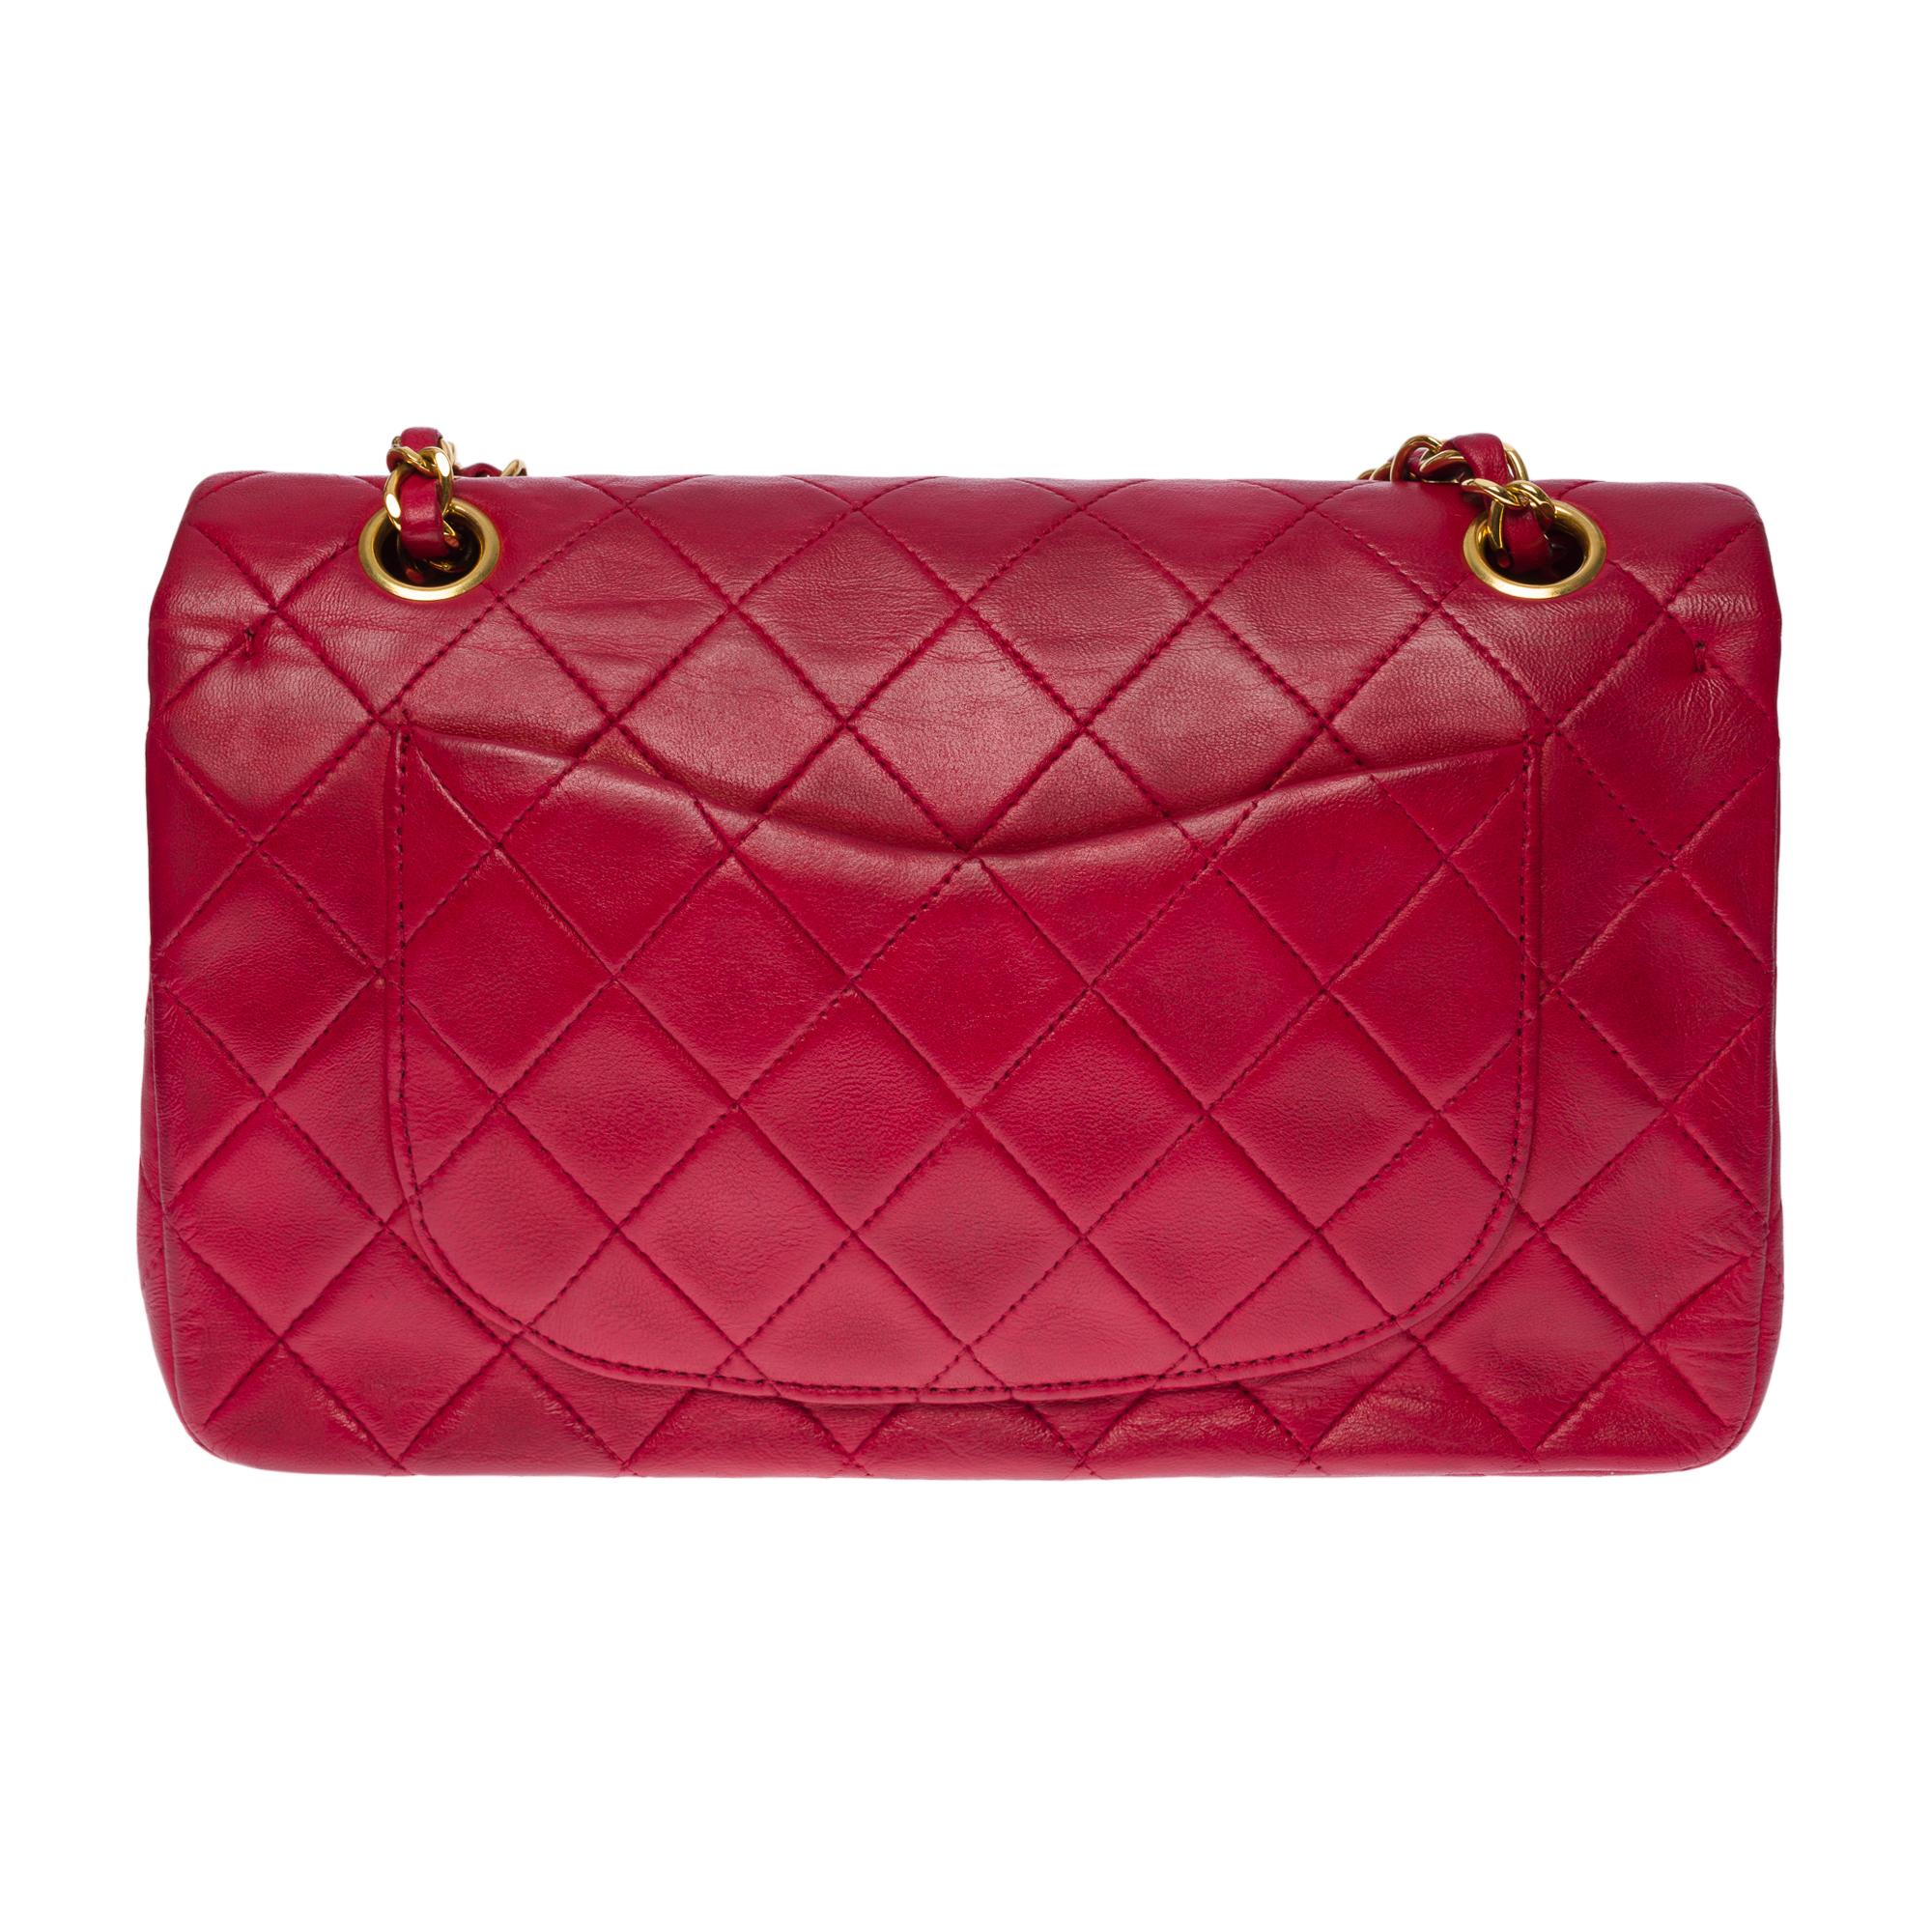 The coveted Chanel Timeless 23 cm double flap shoulder bag in garnet red quilted leather, gold metal hardware, gold metal chain interwoven with red leather for a shoulder and crossbody

Backpack pocket
Flap closure, gold-tone CC clasp
Double